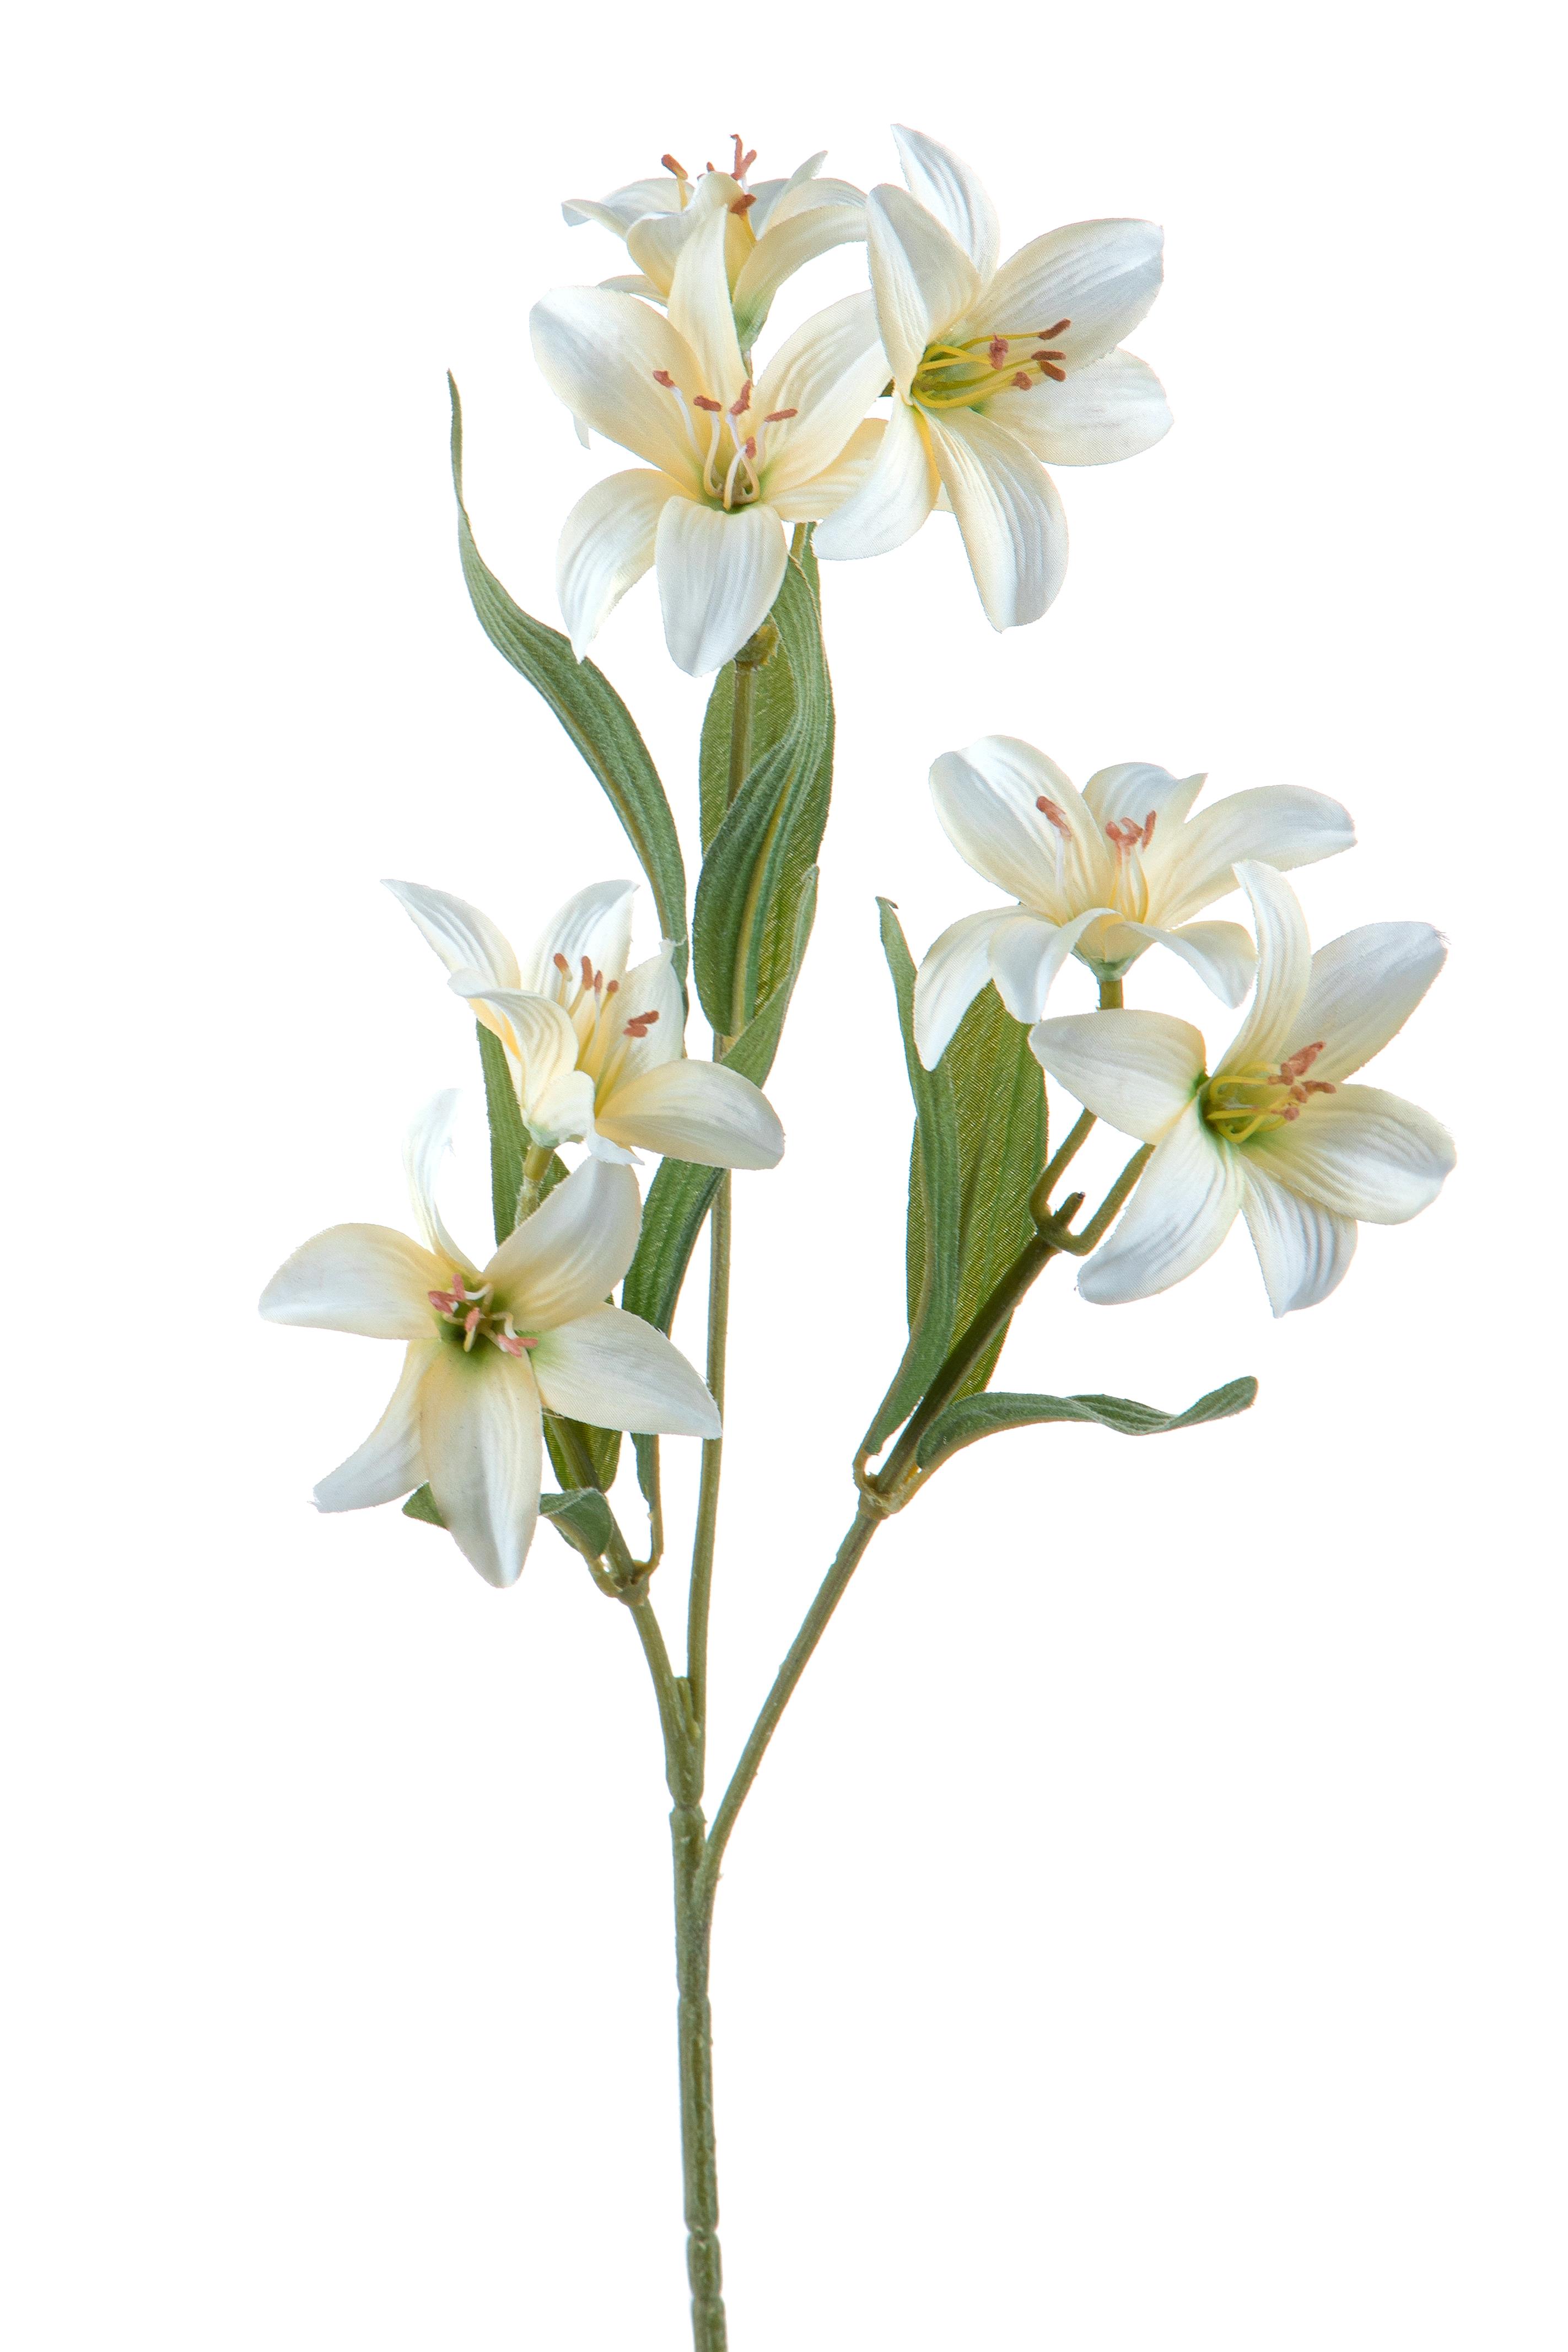 NATURAL PRODUCTS DRIED FLOWERS AND ERBS,NATURAL GRASS,LILIUM MINI FLOWER H.56 CM